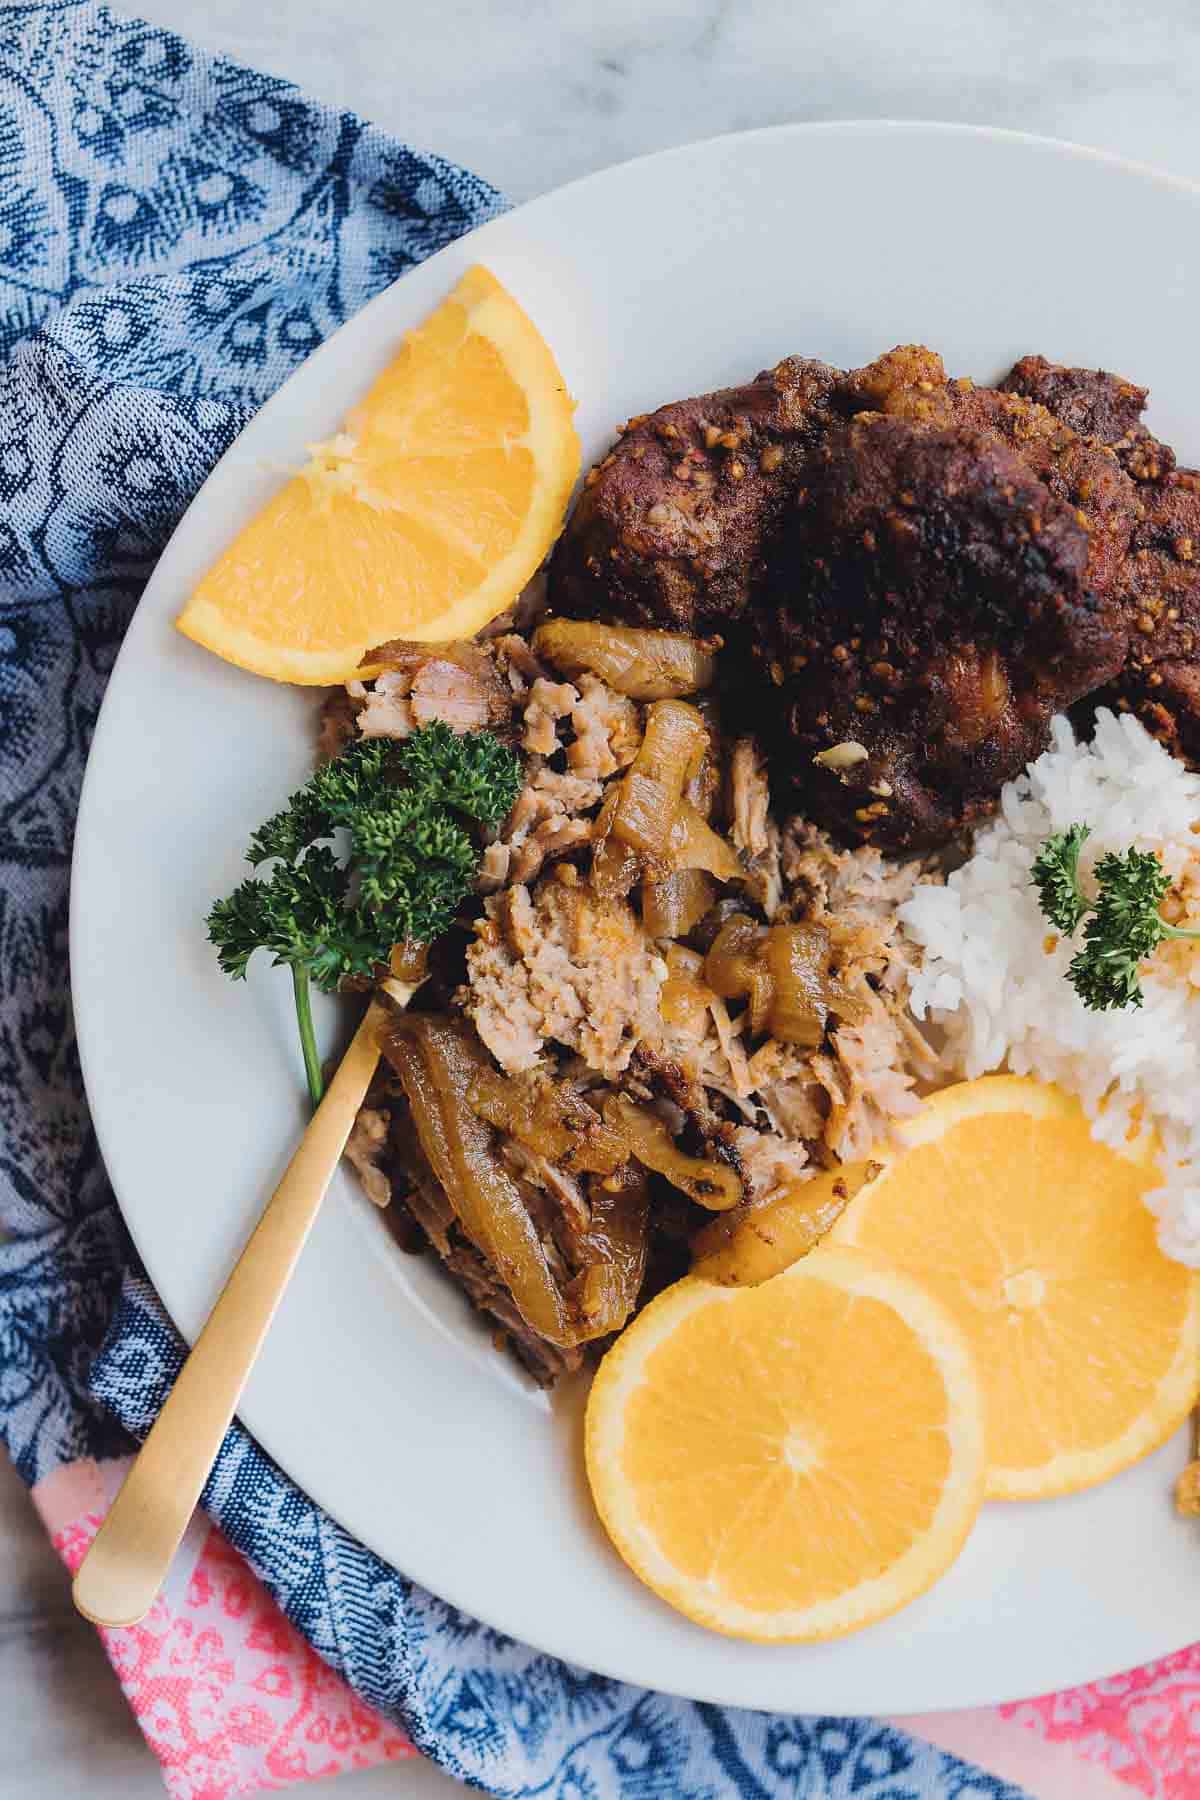 Orange Spiced Pork freezer meal. The citrus from the orange and the spice from the cloves, nutmeg, and seasoning packet will make your taste buds go wild.